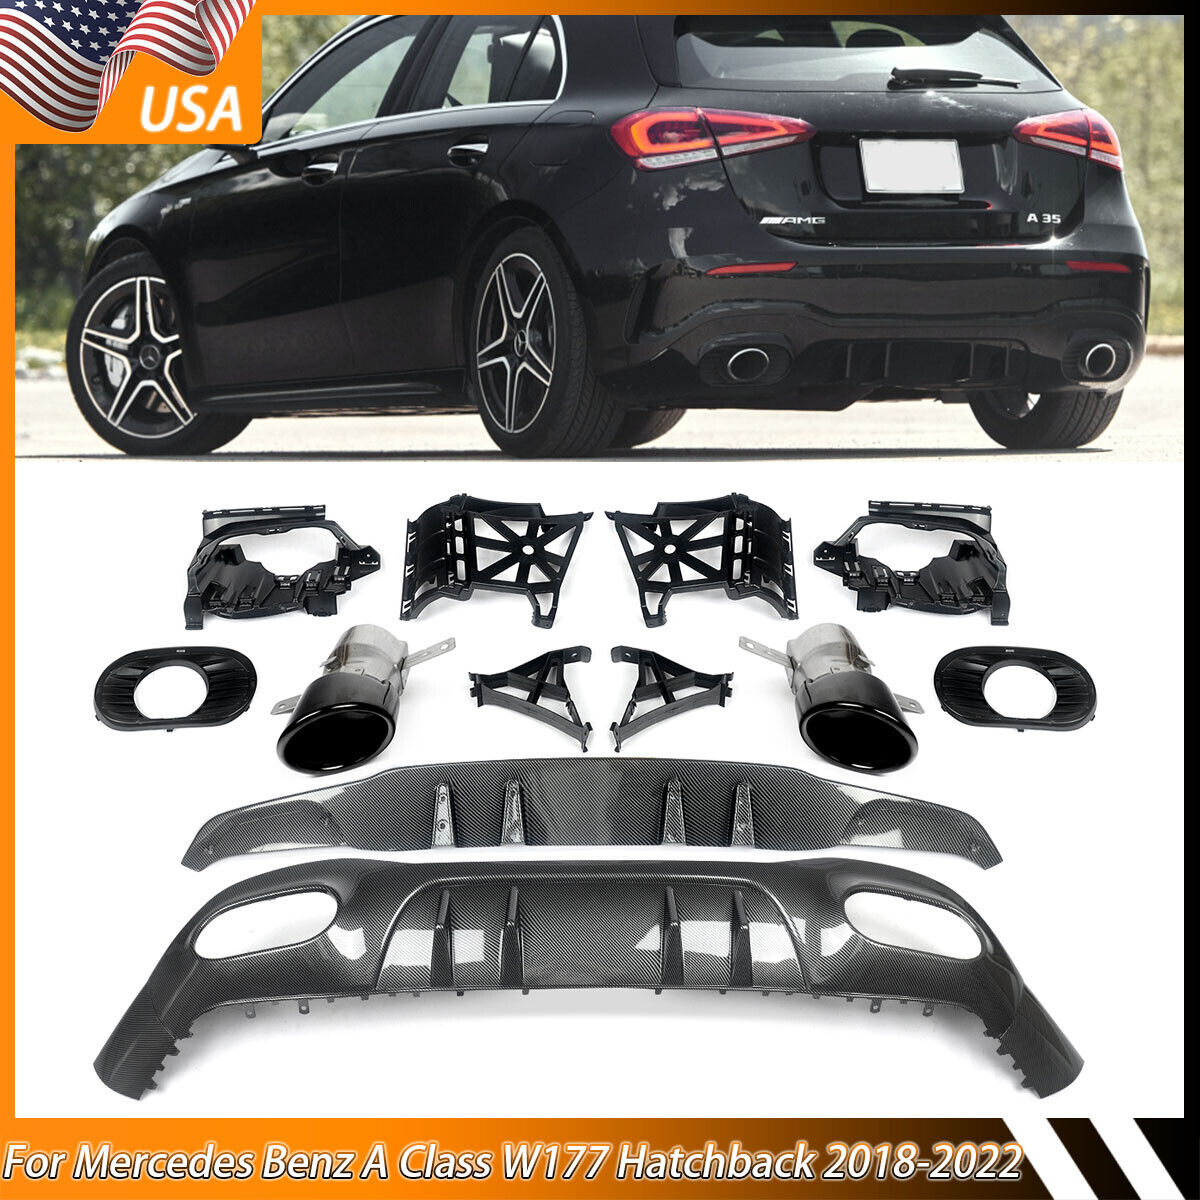 Rear Diffuser Lip W/Exhaust Tips For Benz 2018-2020 W177 A200 A250 Sport A35 AMG